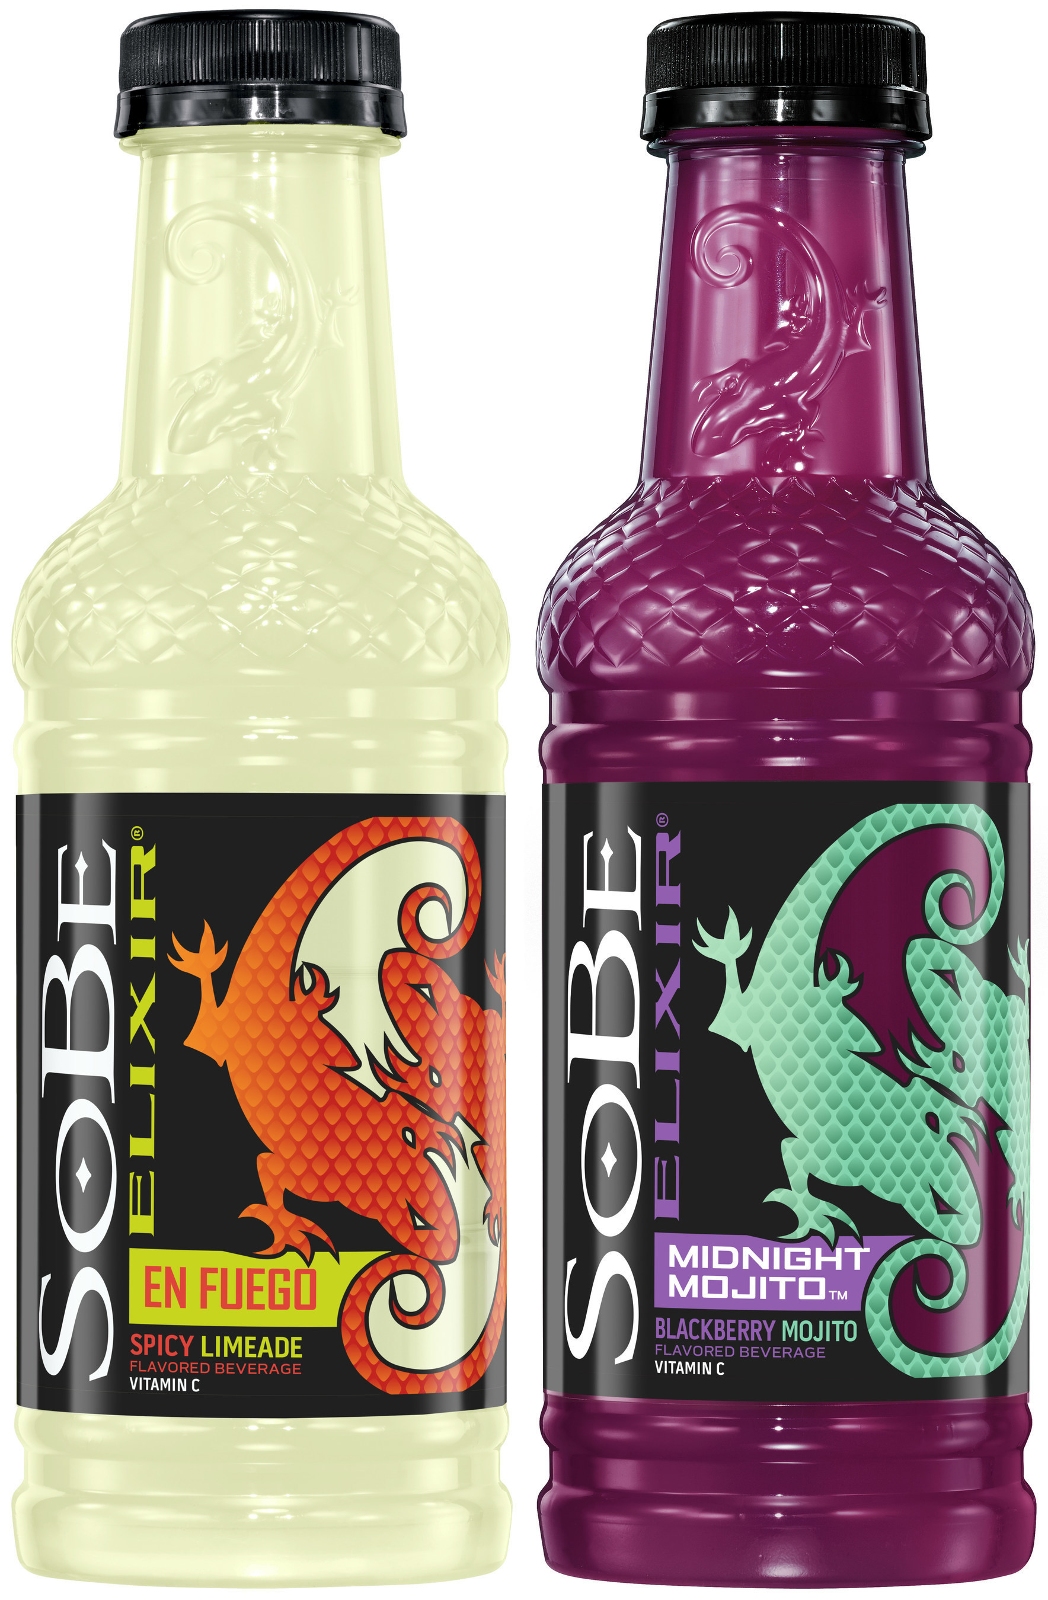 SoBe Launches Two New Flavors - Midnight Mojito and En Fuego